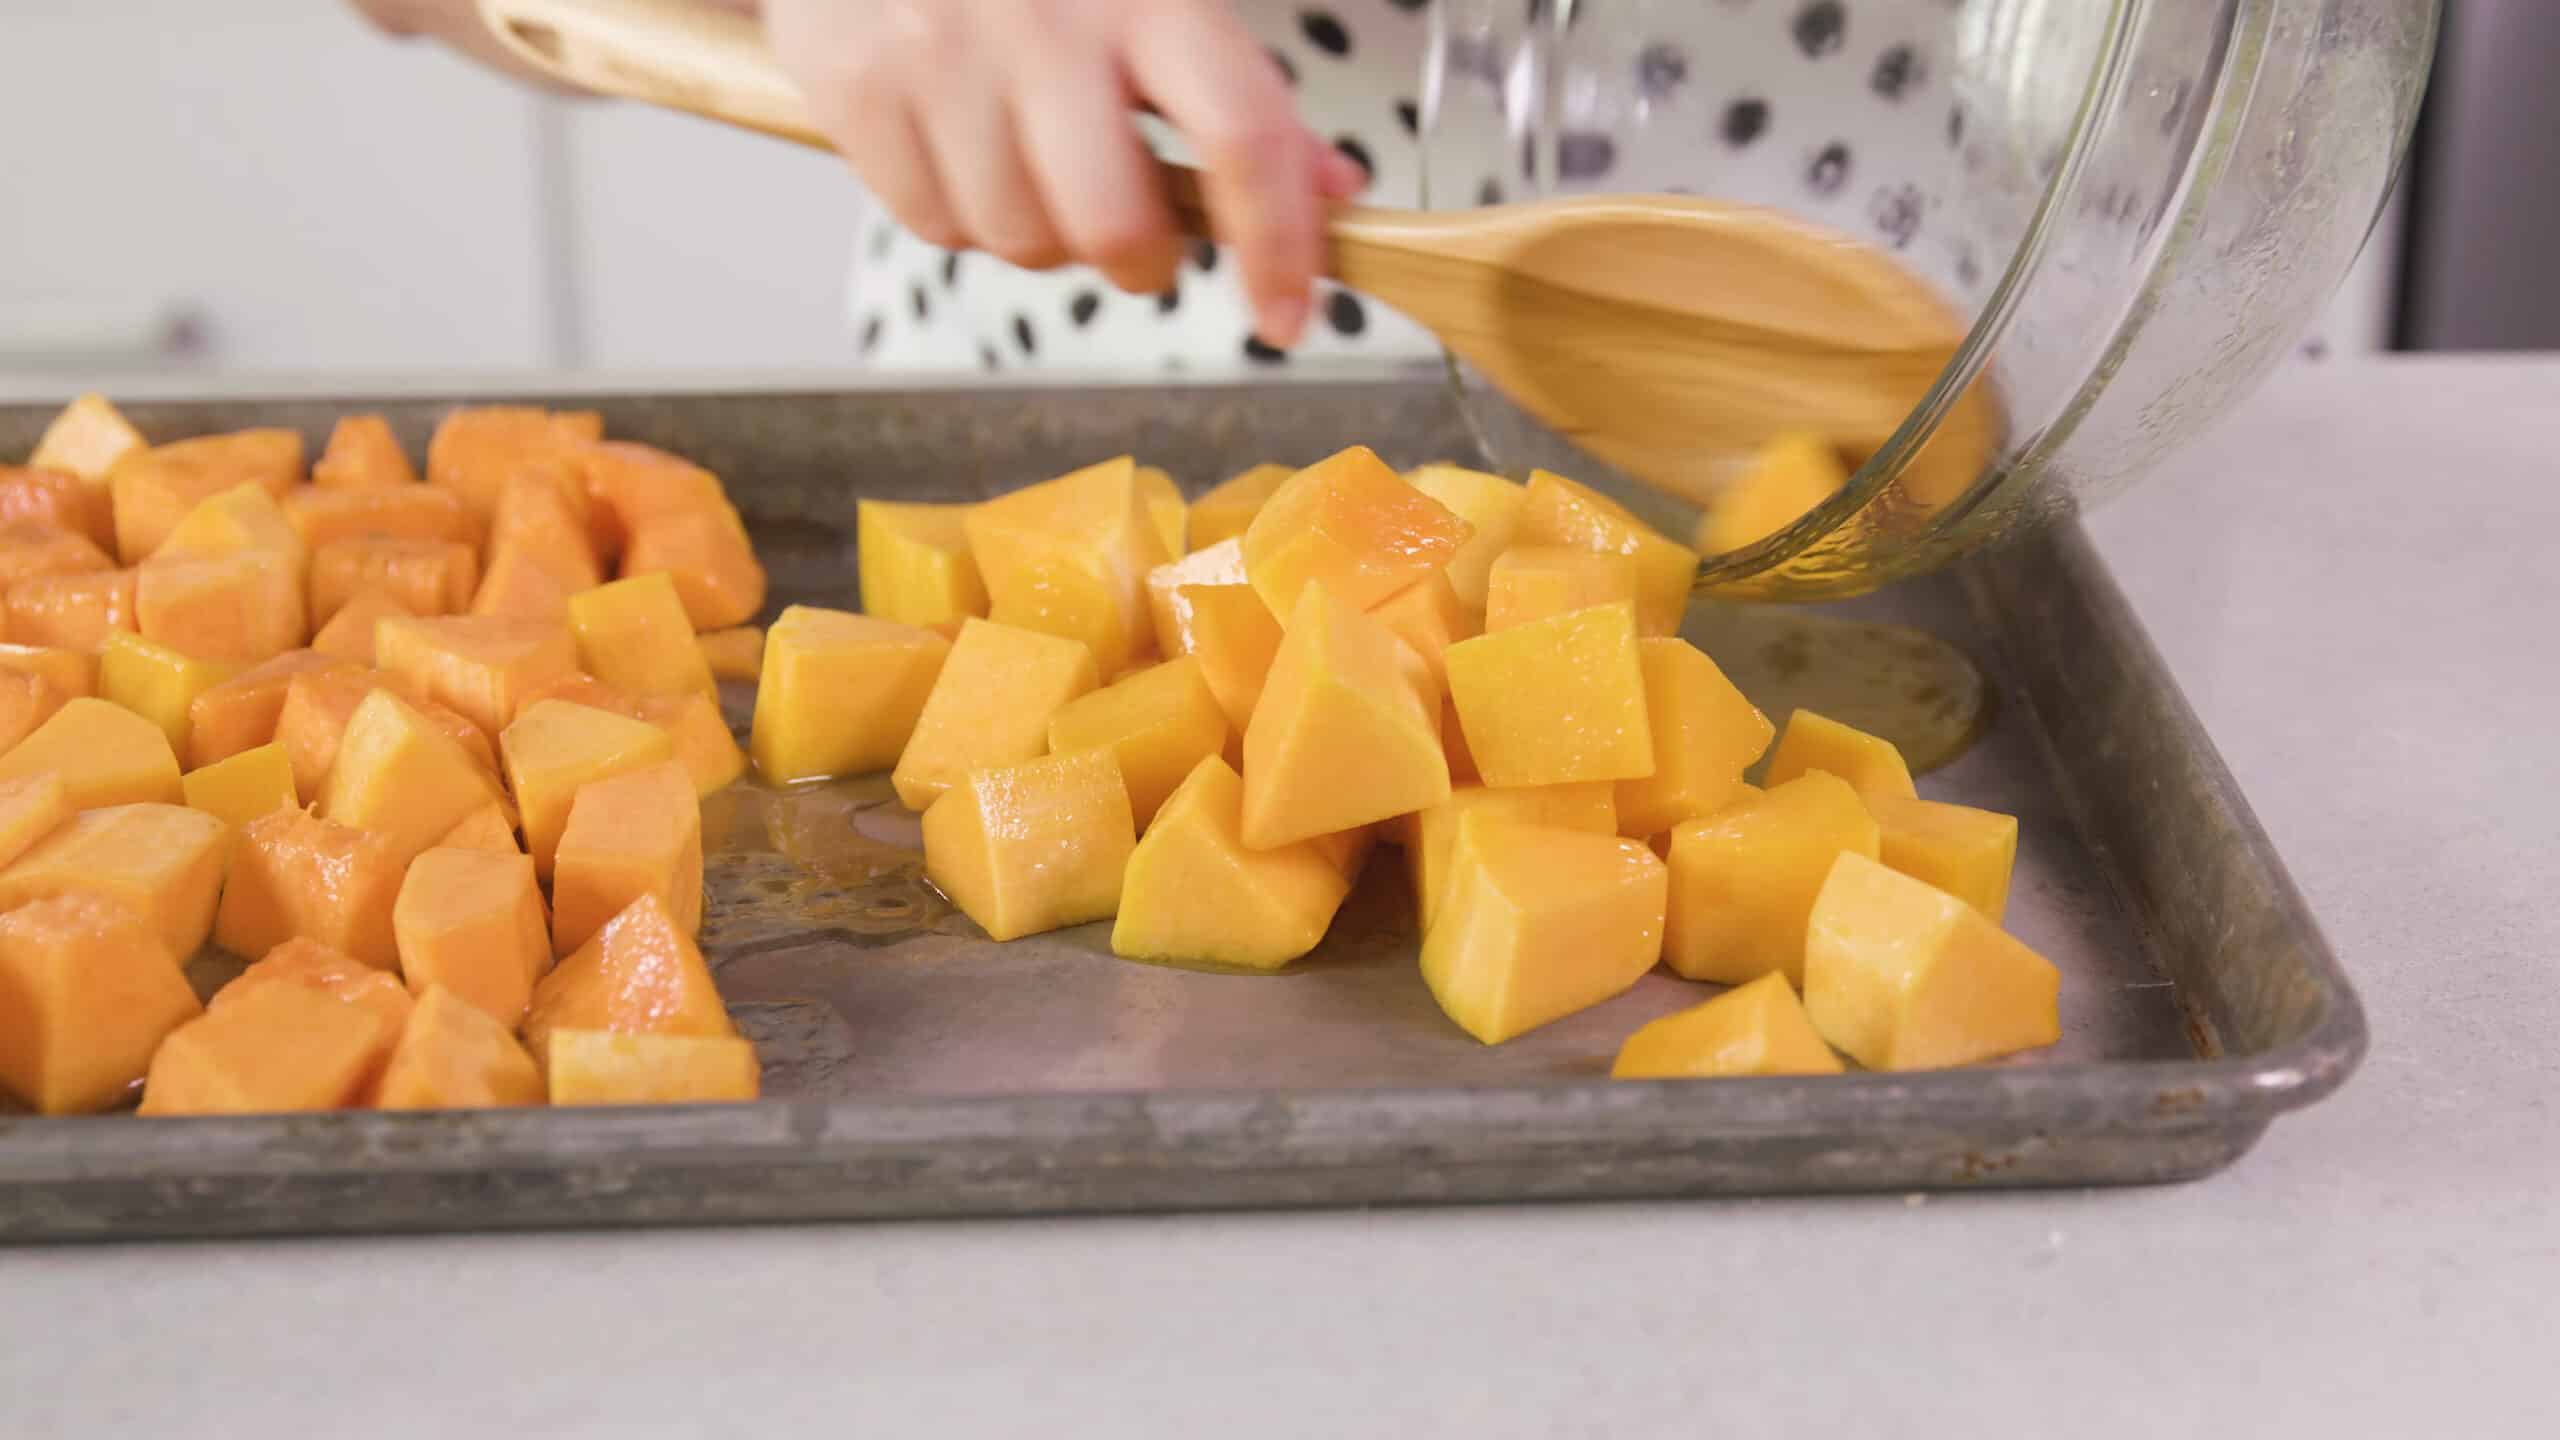 Angled view of silver baking sheet with maple flavored butternut squash being poured out from a clear mixing bowl using a wooden spoon.